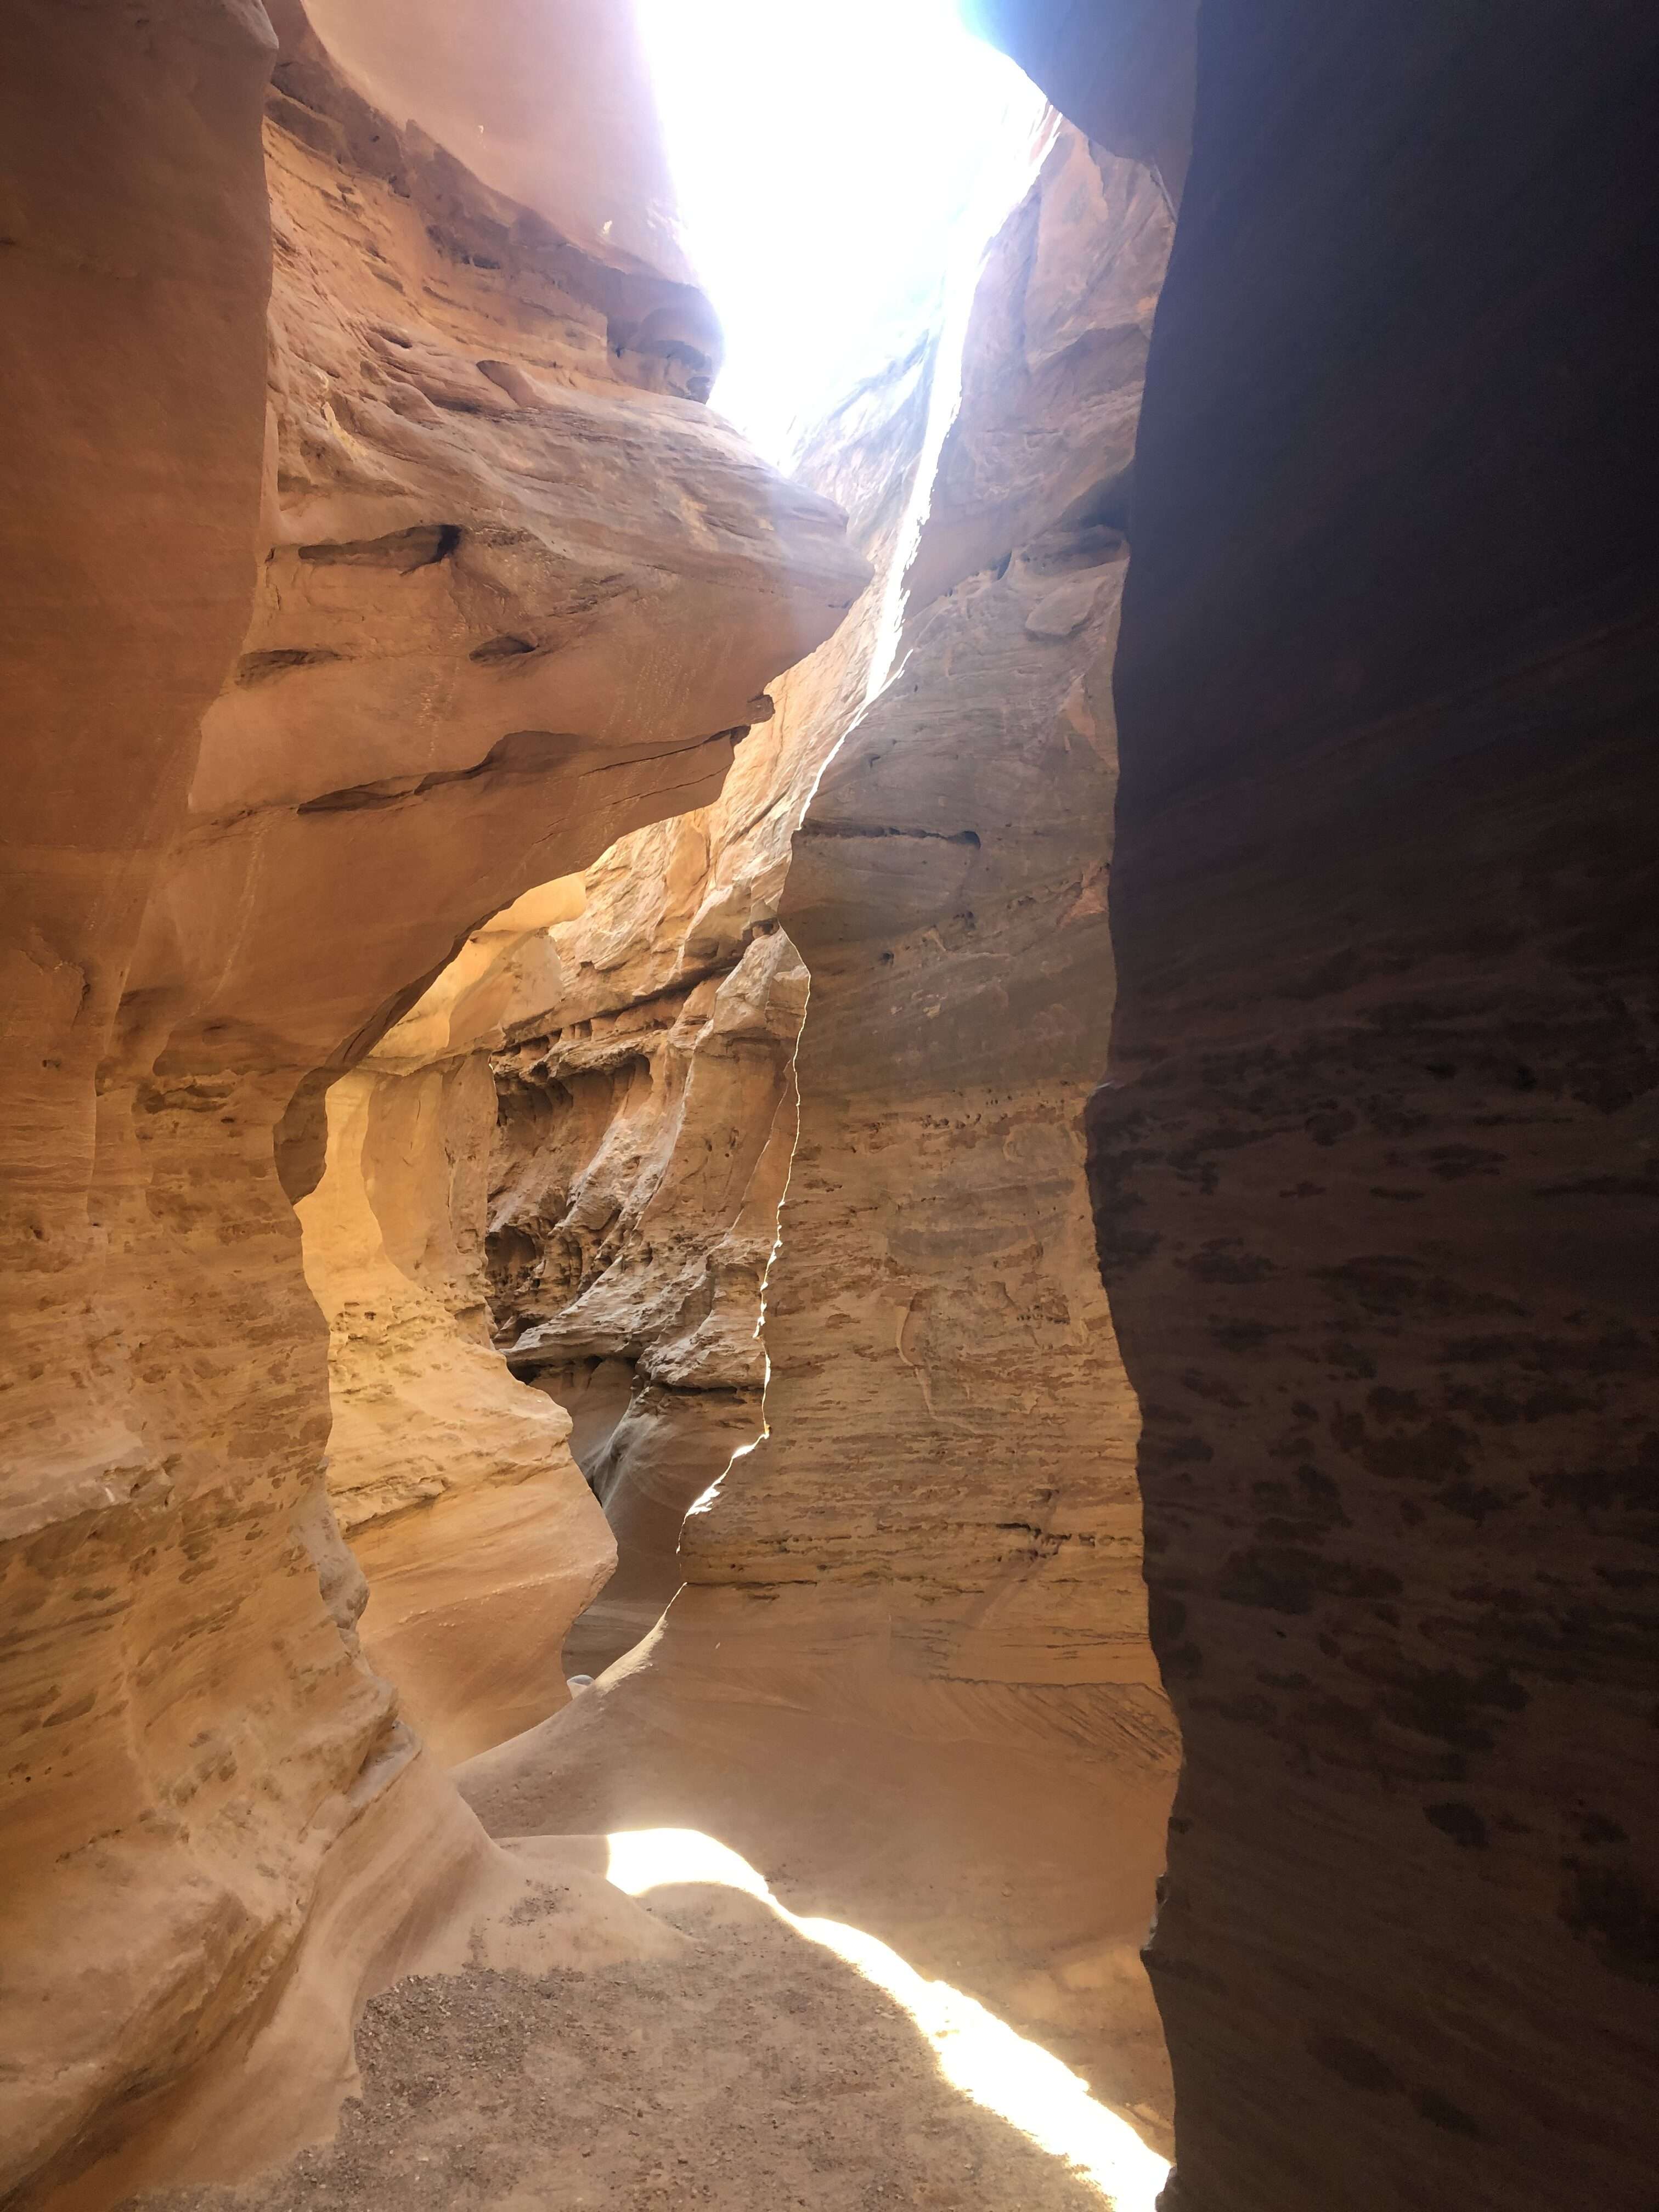 Sunny trail through a slot canyon in Utah